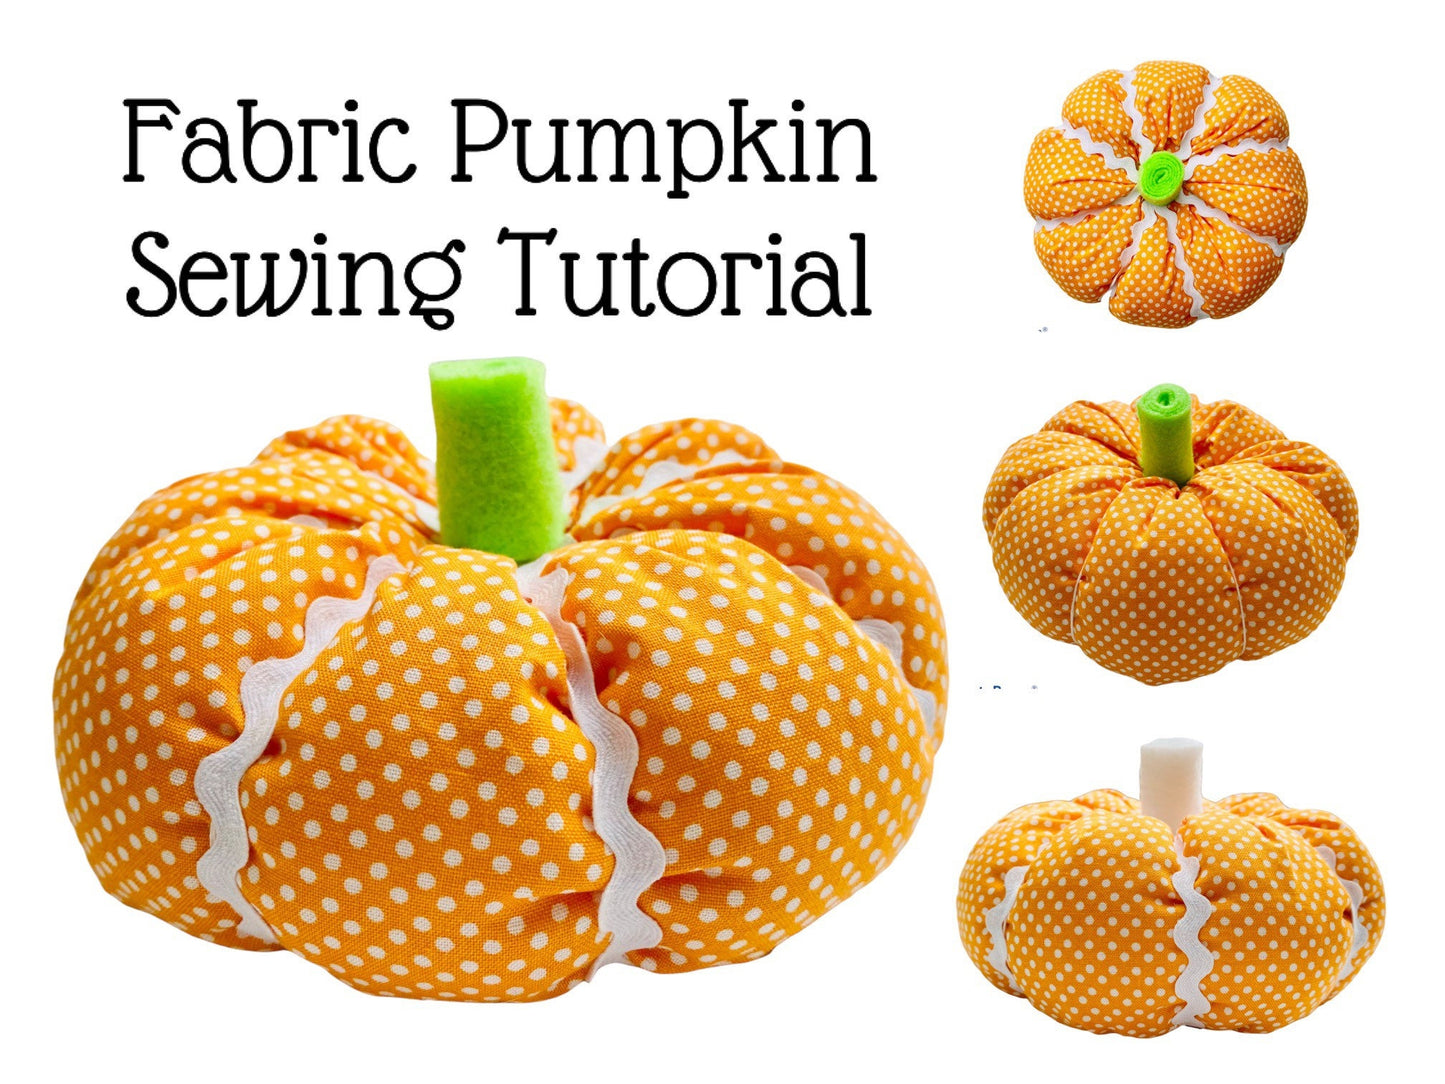 Fabric Pumpkins in 4 Sizes